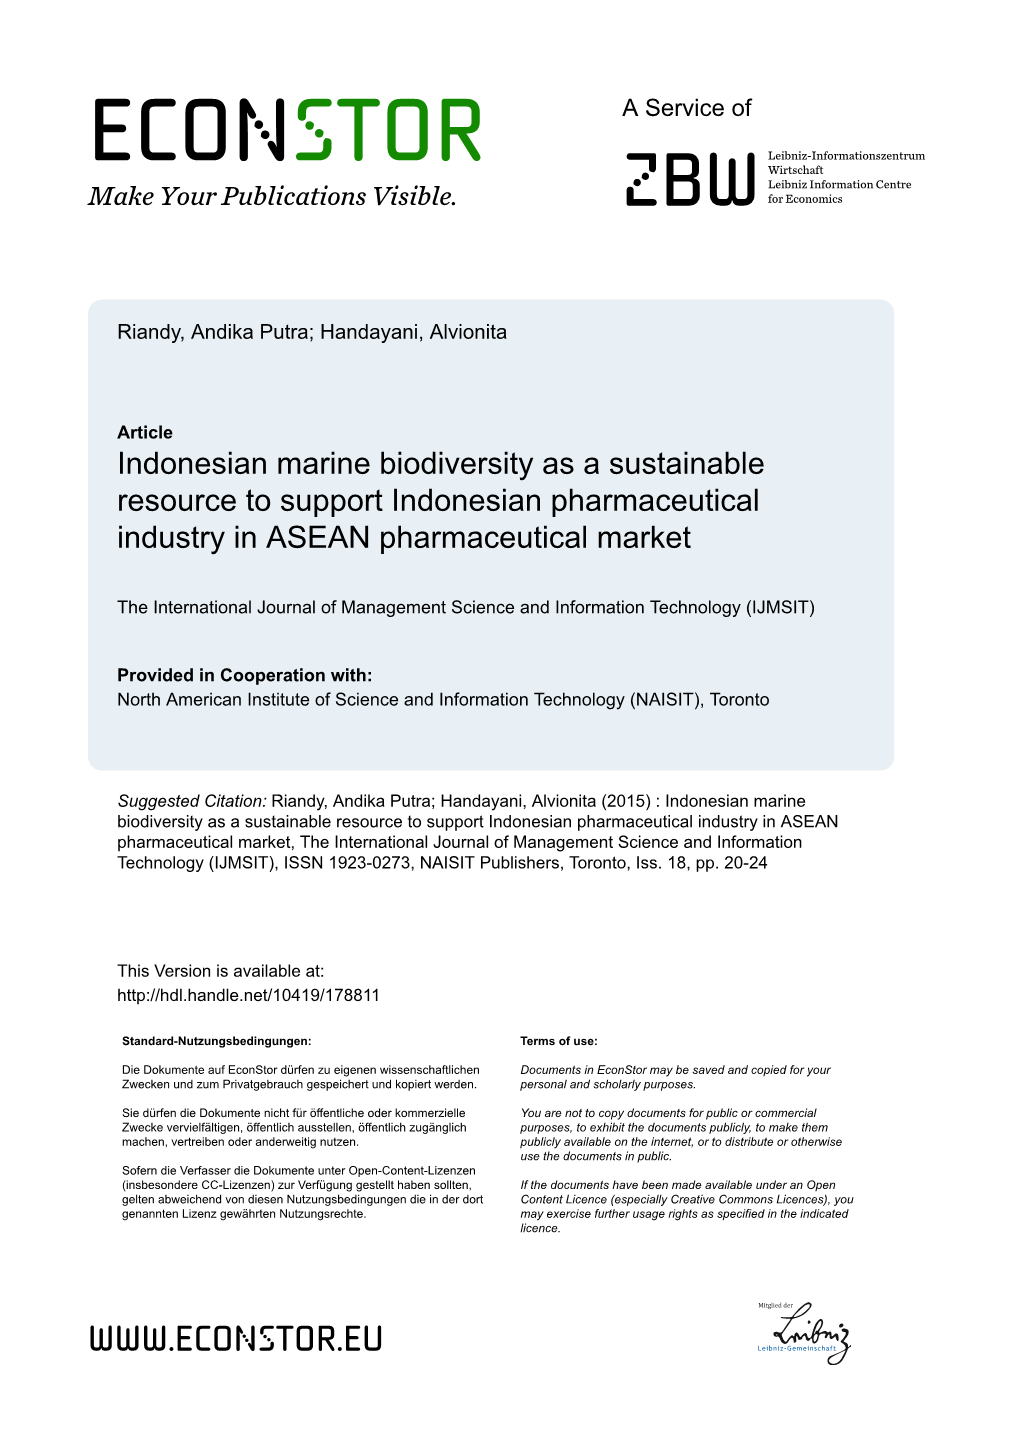 Indonesian Marine Biodiversity As a Sustainable Resource to Support Indonesian Pharmaceutical Industry in ASEAN Pharmaceutical Market